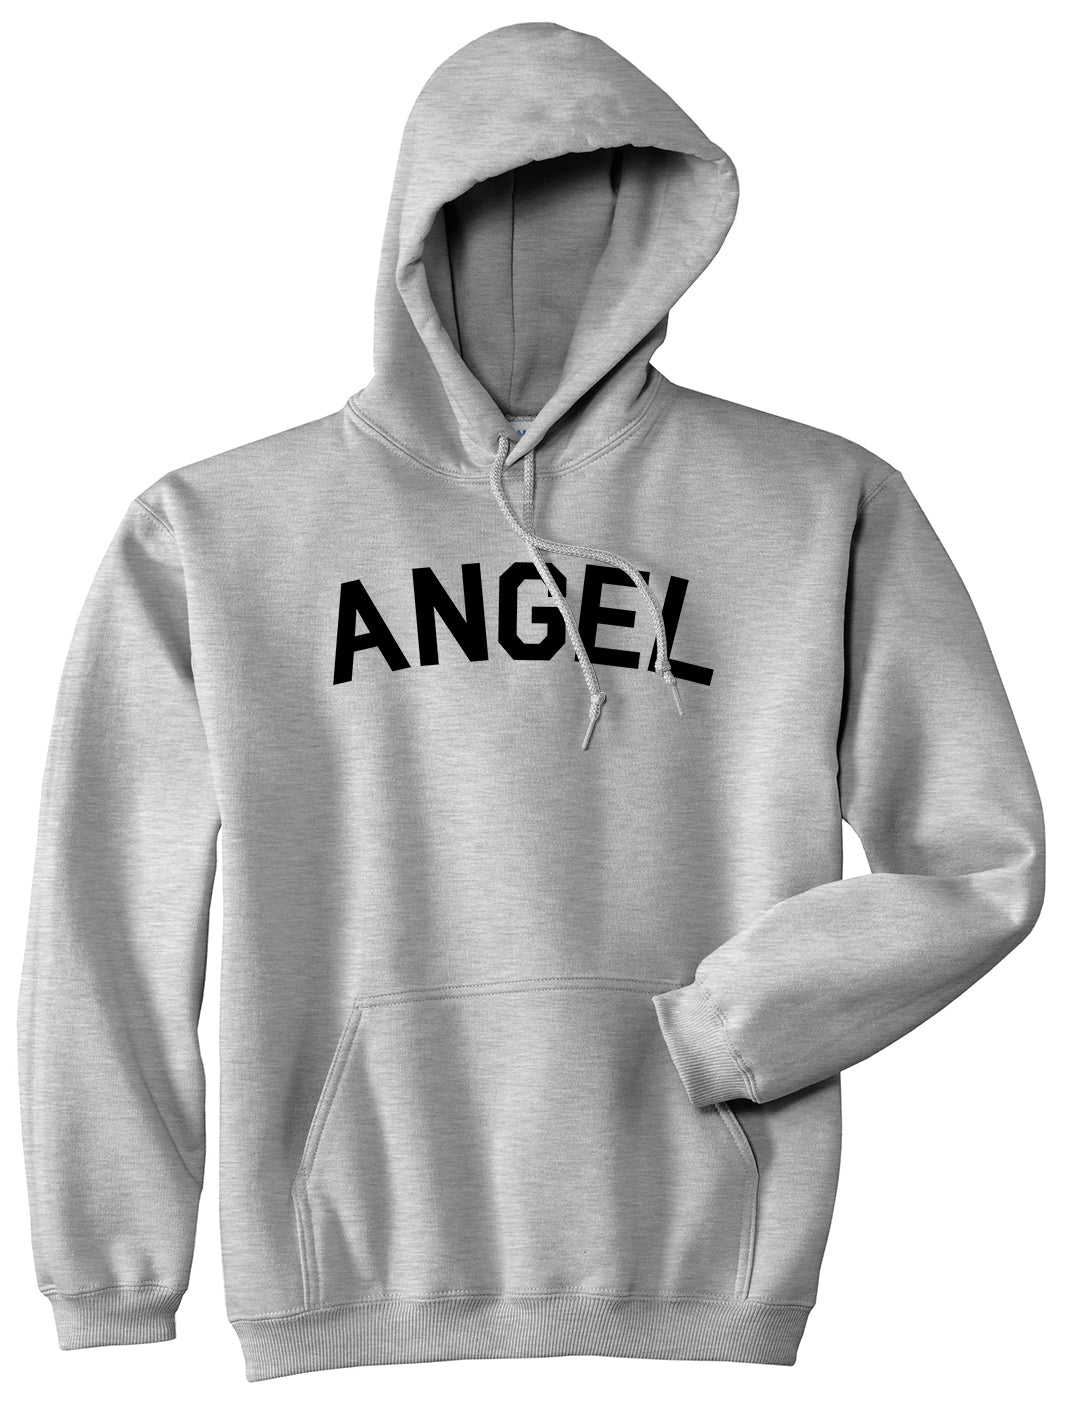 Angel Arch Good Pullover Hoodie in Grey